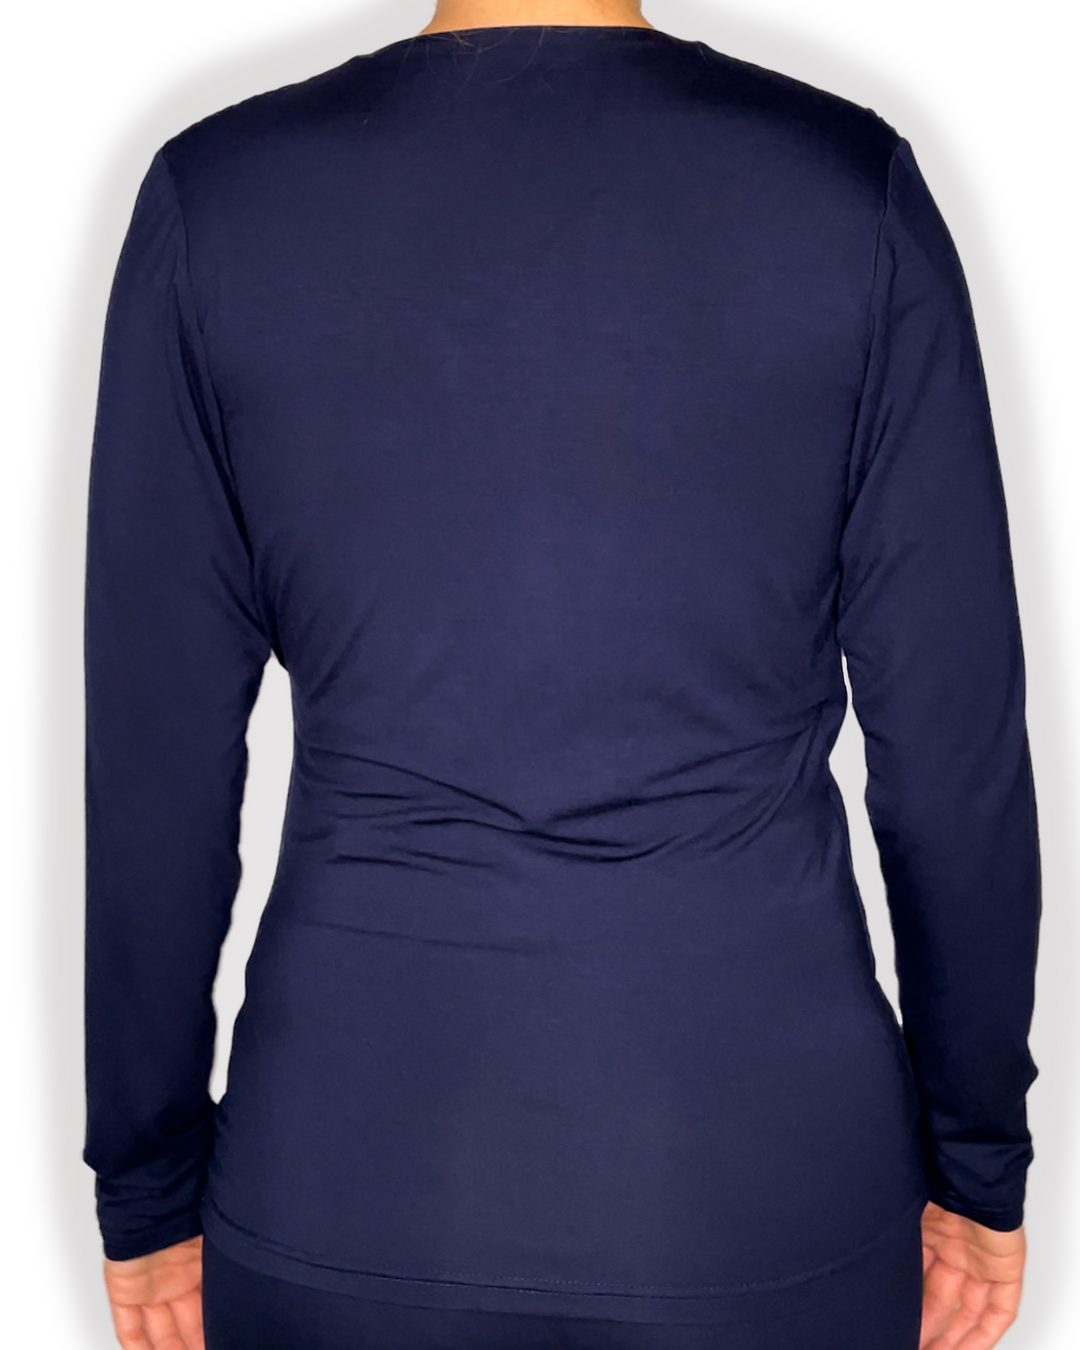 jia and kate ROSIE Braless Bamboo Wrap Top Long Sleeve in blue color back view